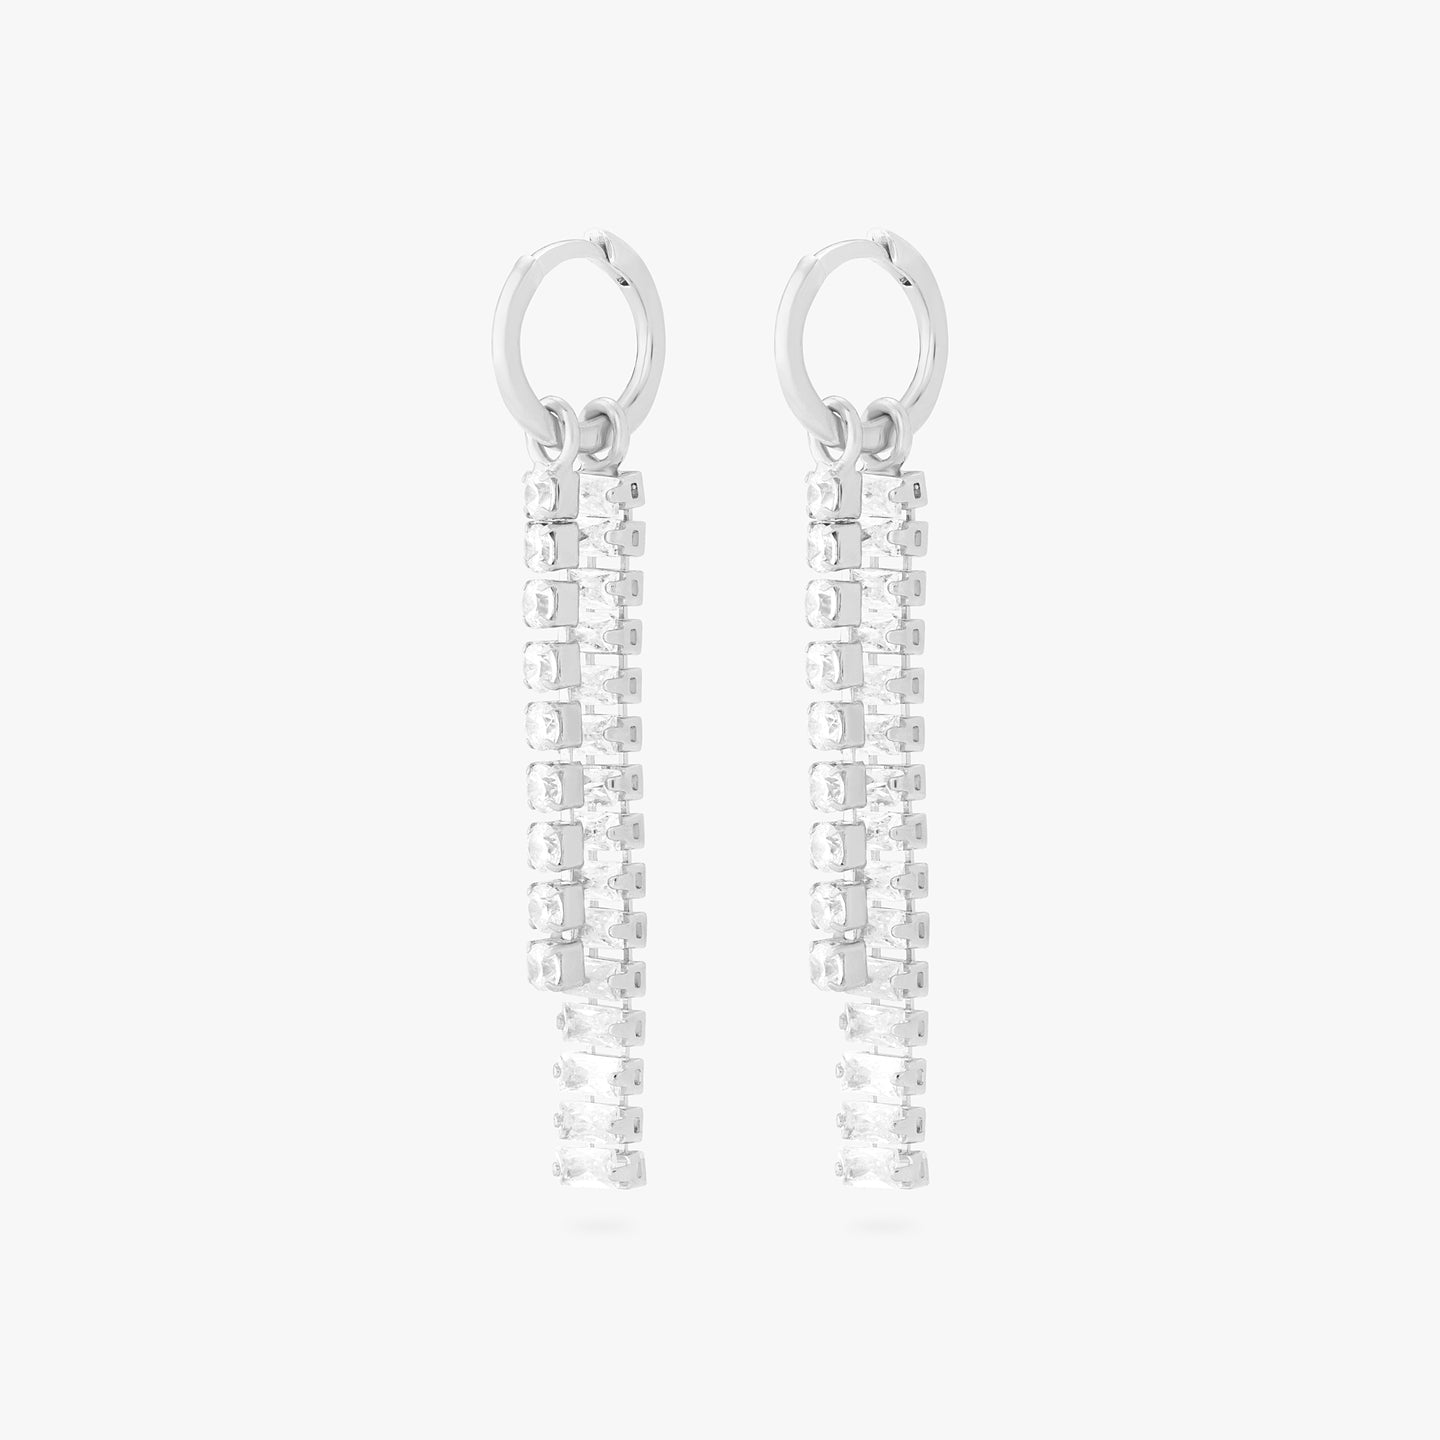 This is an image of a pair of silver small slim huggies with a charm that consists of a string of silver/clear CZs, and a charm that consists of silver/clear baguette CZs. [pair] color:null|silver/clear